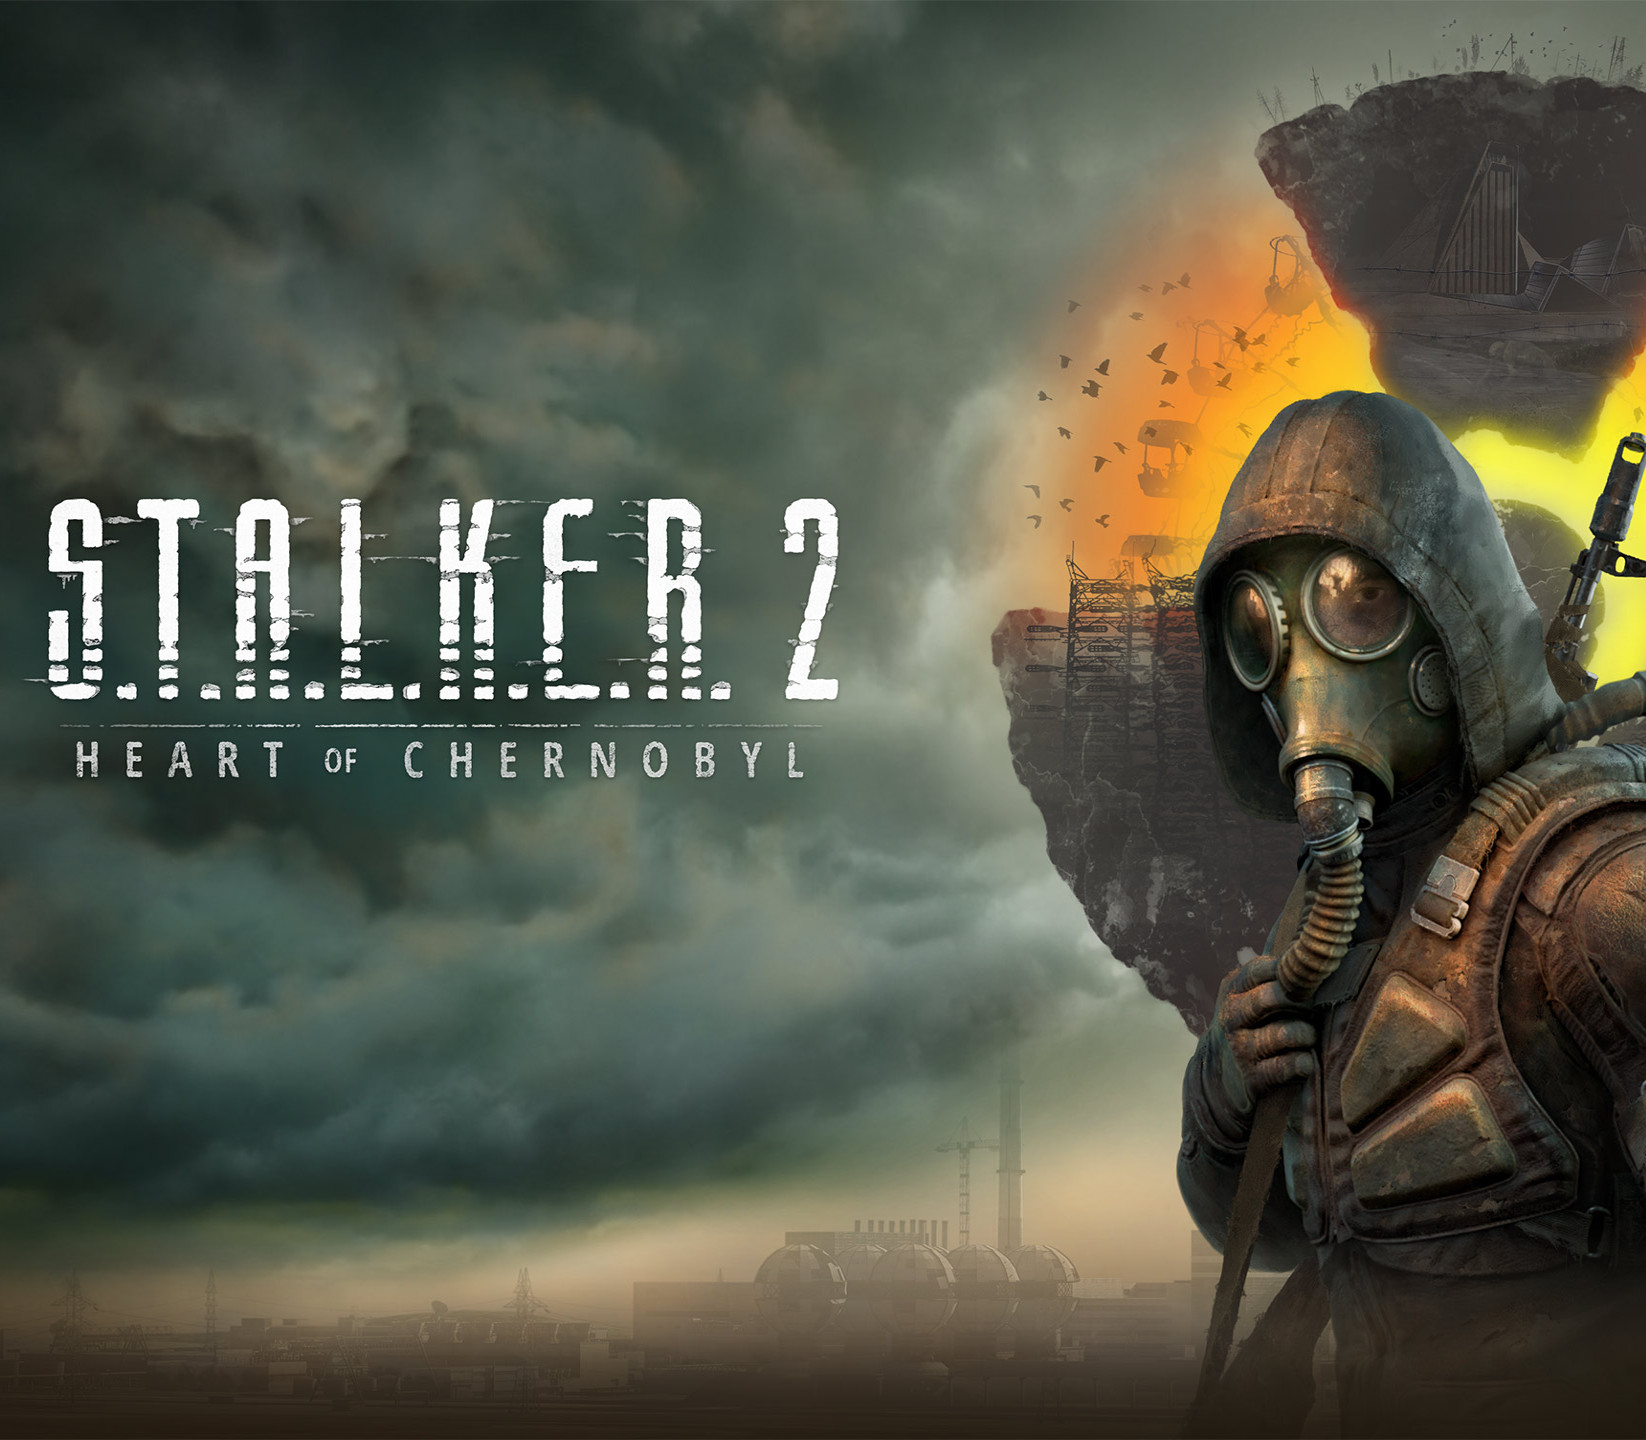 S.T.A.L.K.E.R. 2: Heart of Chornobyl Epic Games Account